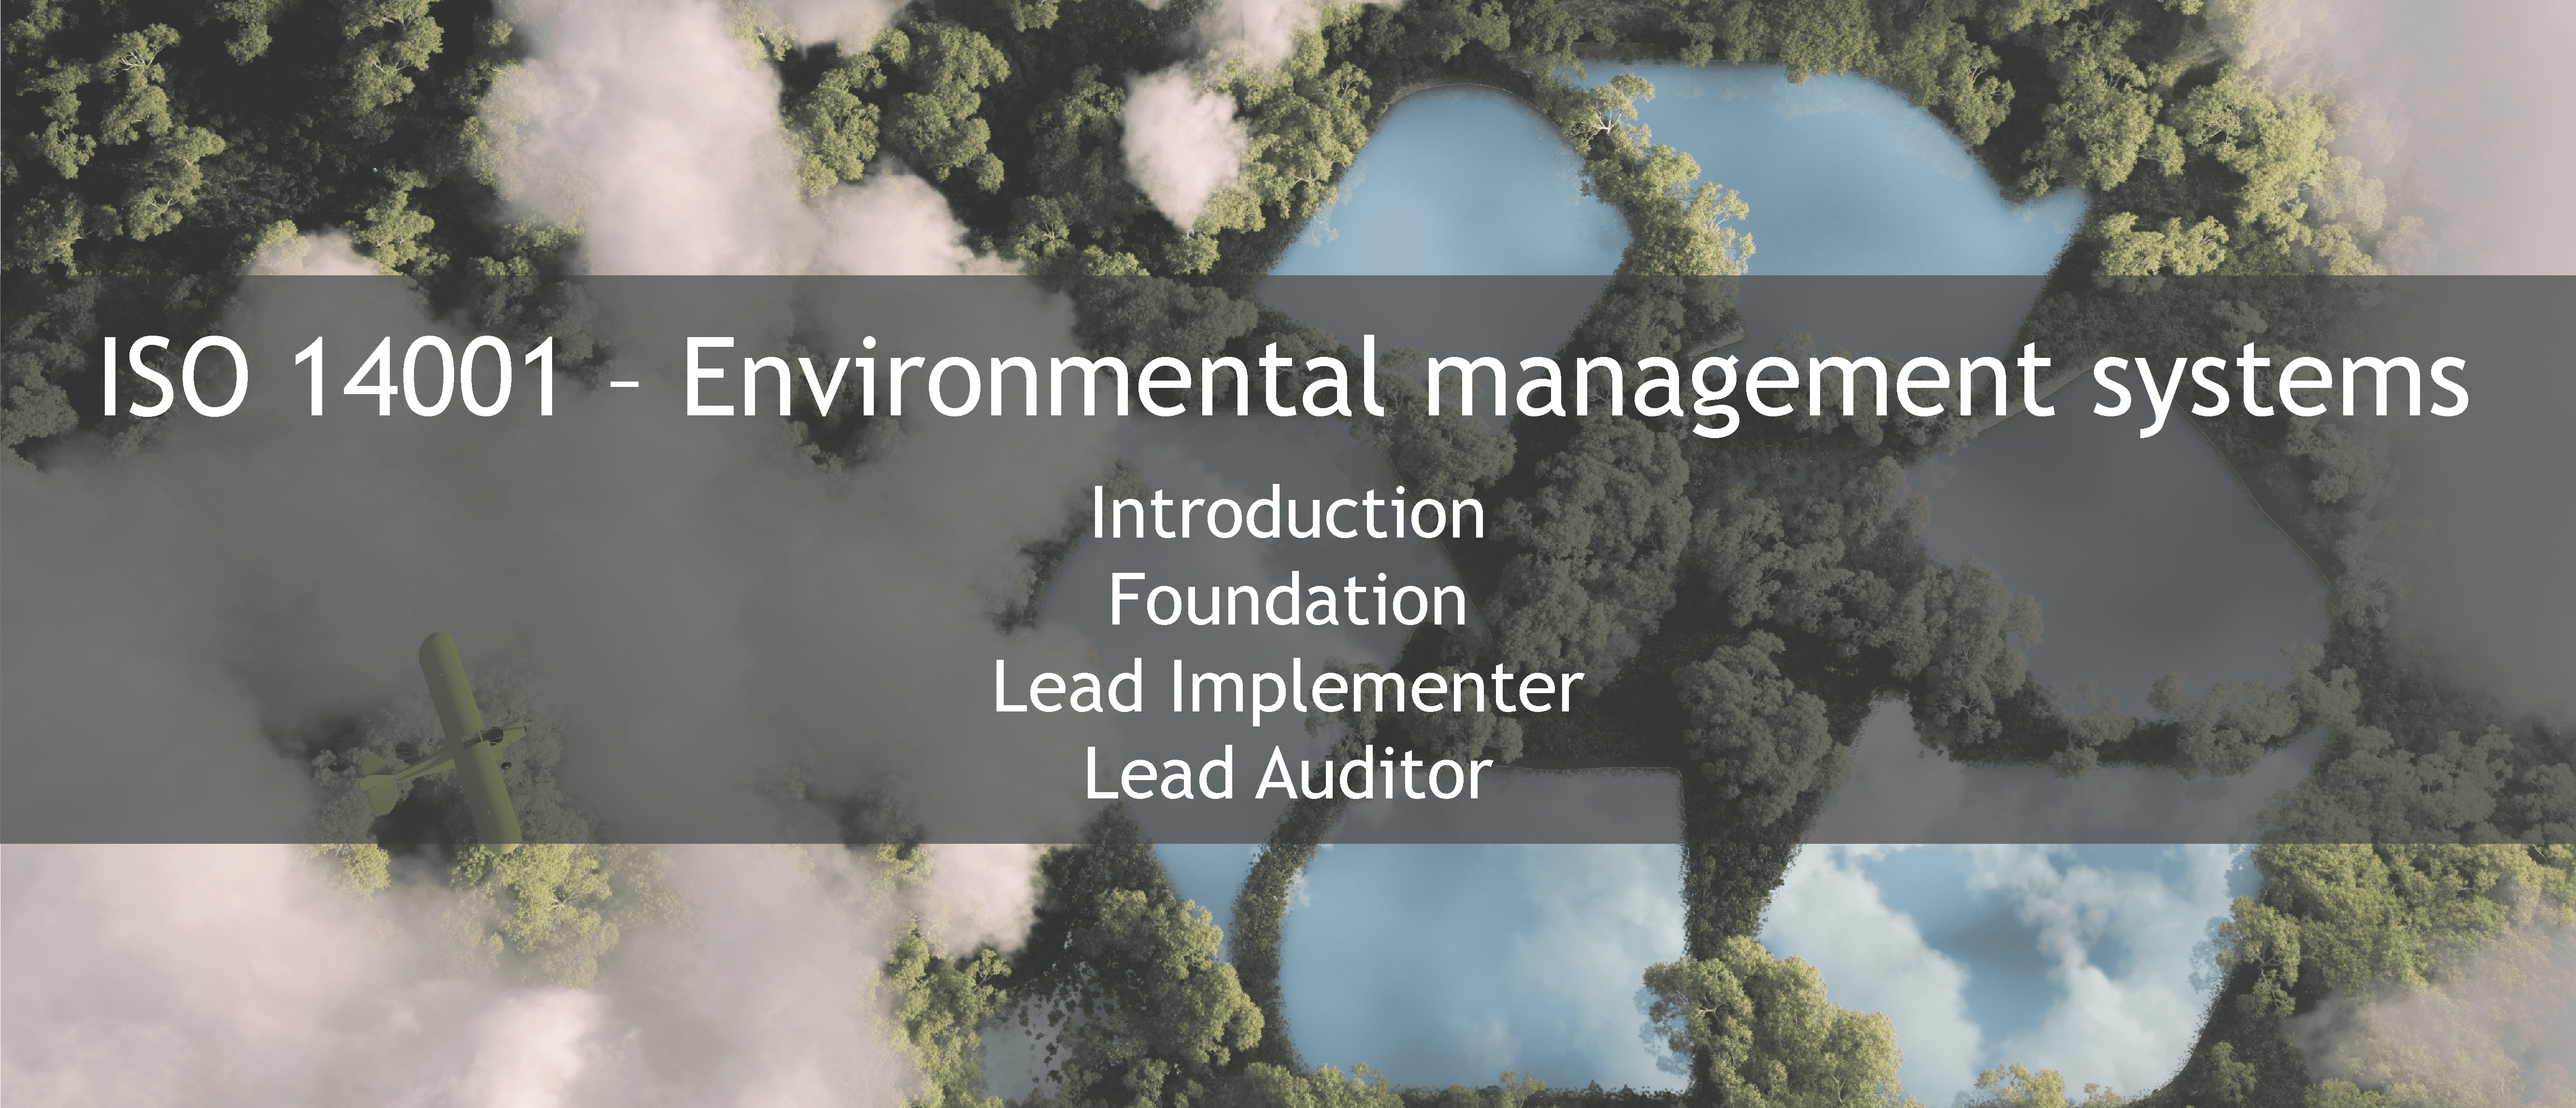 ISO 14001 training offer - ISO 14001 - Environmental management systems